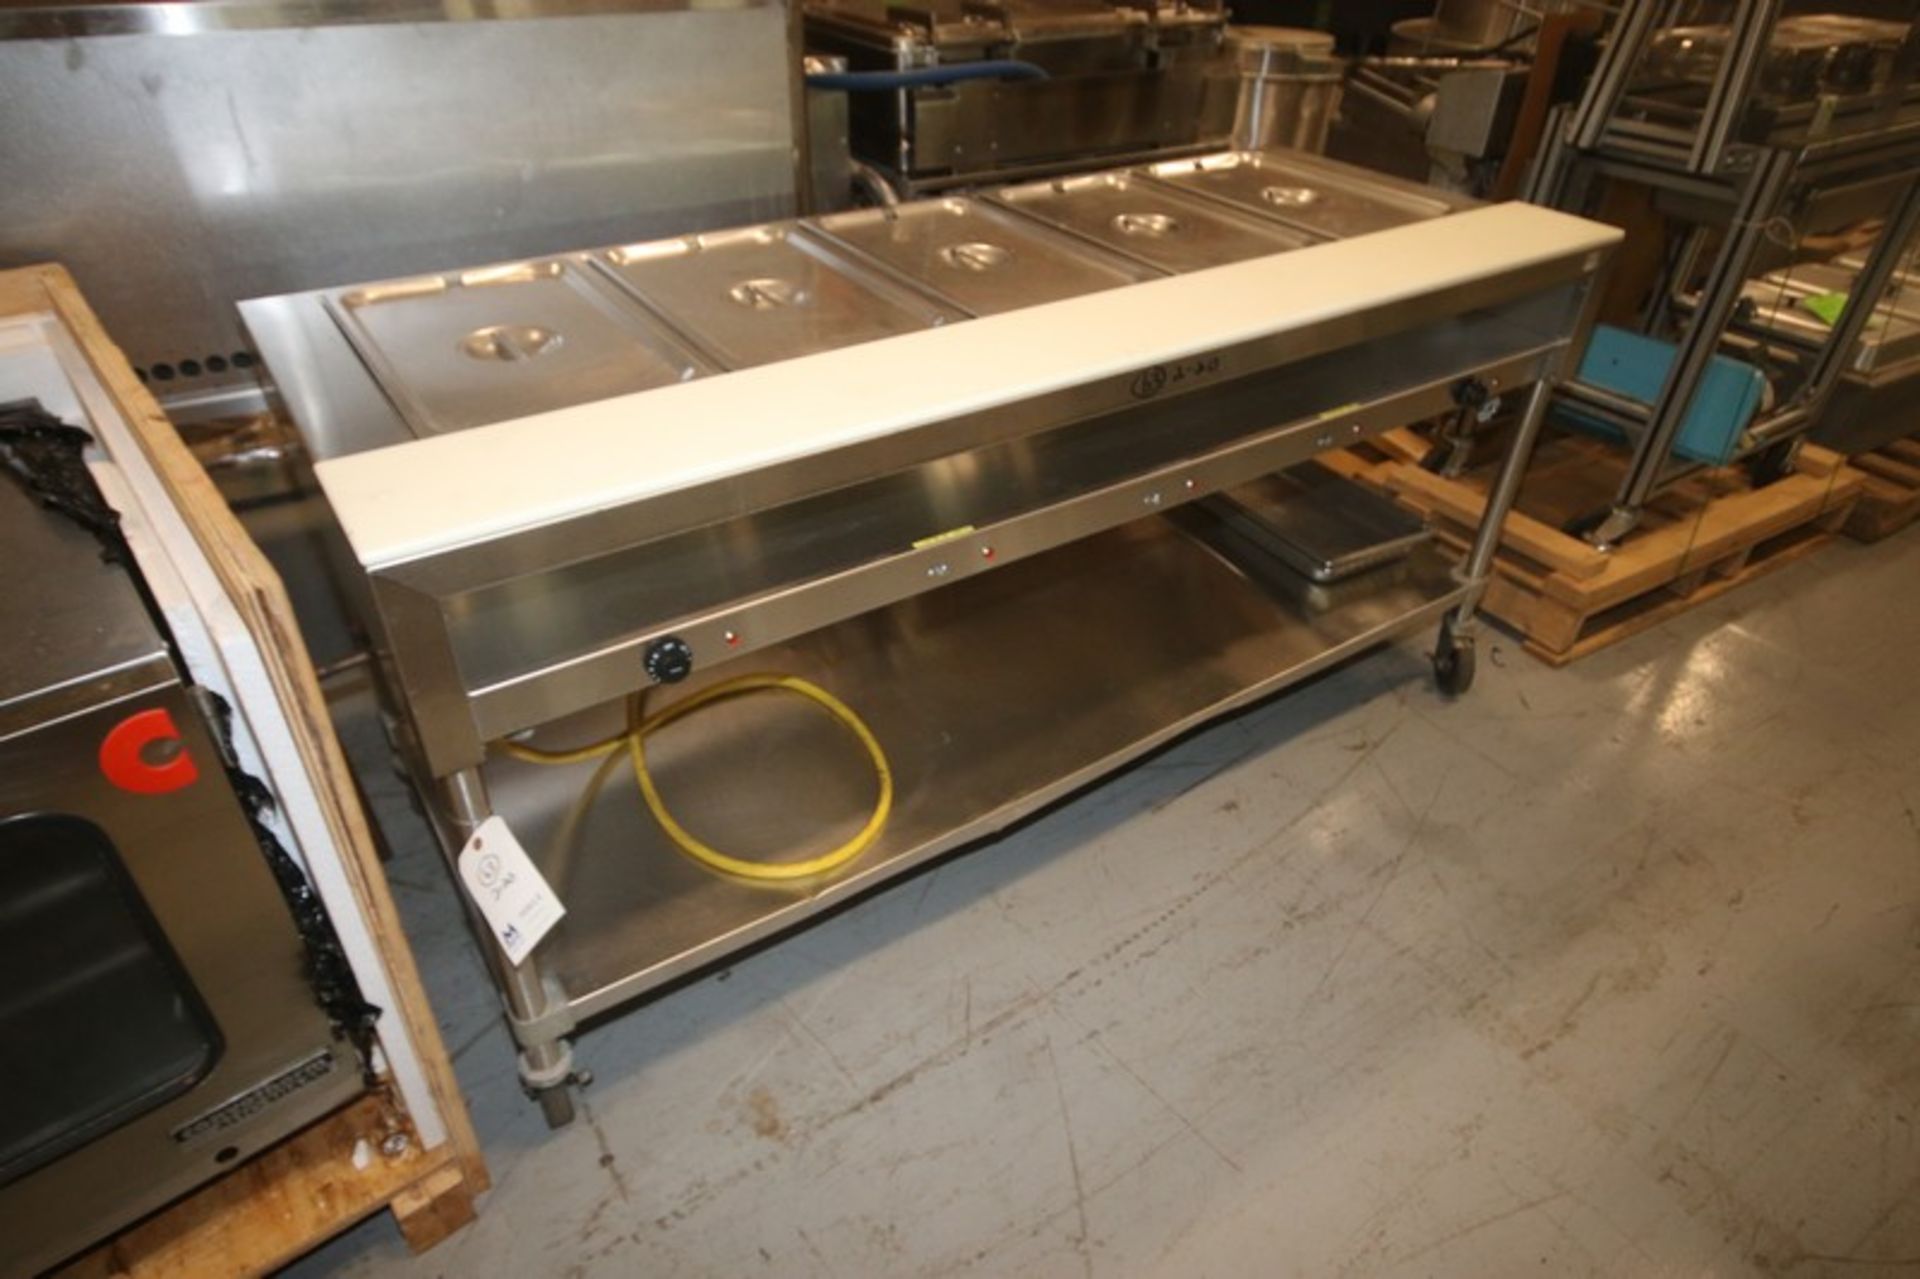 5-Station S/S Buffet Station,with S/S Botom Shelf, Overall Dims.: Aprox. 76" L x 30" W x 36" H ( - Image 2 of 5